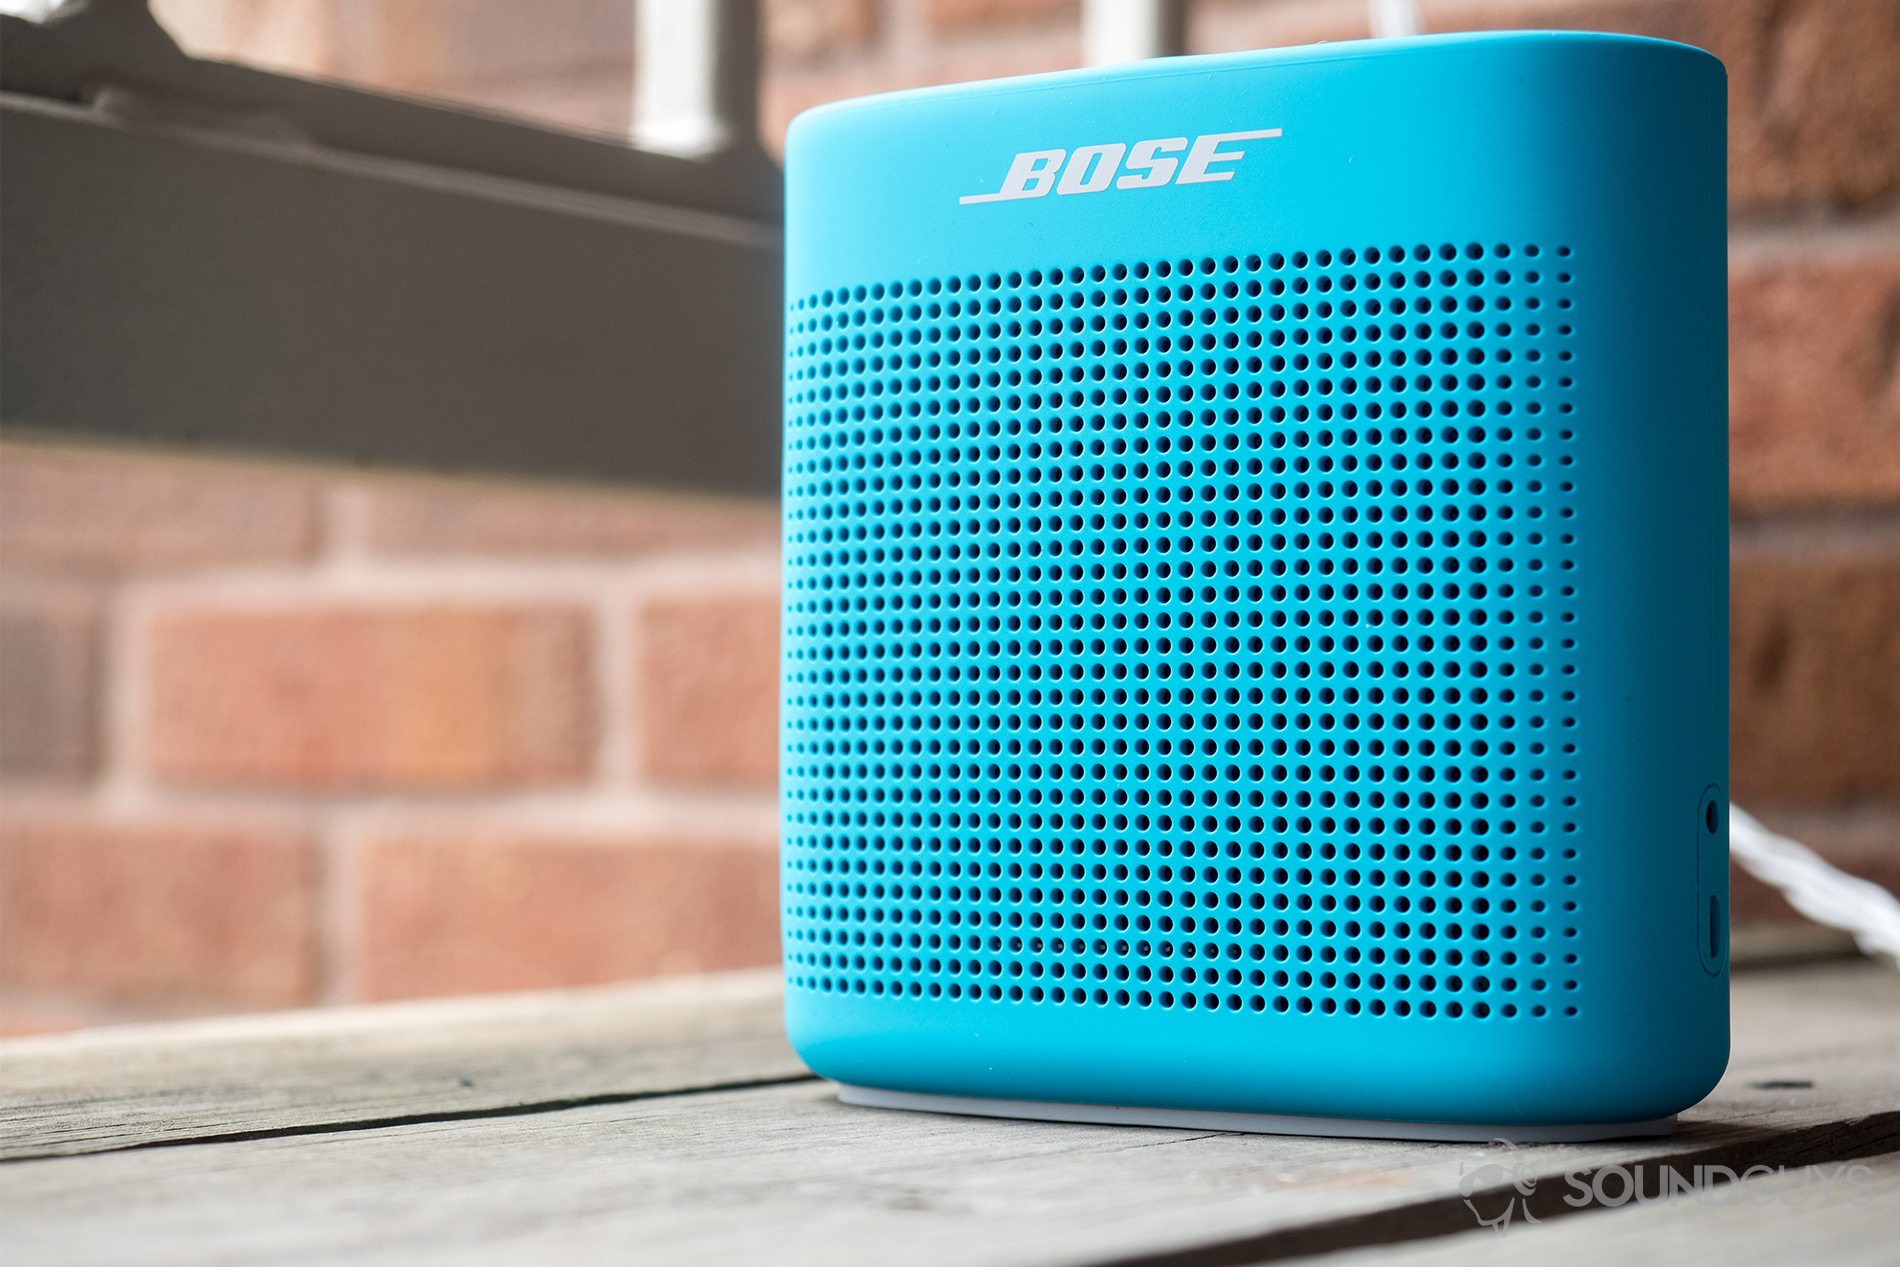 The SoundLink Color II is one of many Bose products that is compatible with the Bose Connect app, which lets users control volume, update firmware, and switch between devices. Pictured: The Bose SoundLink Color II speaker at an angle on a balcony.